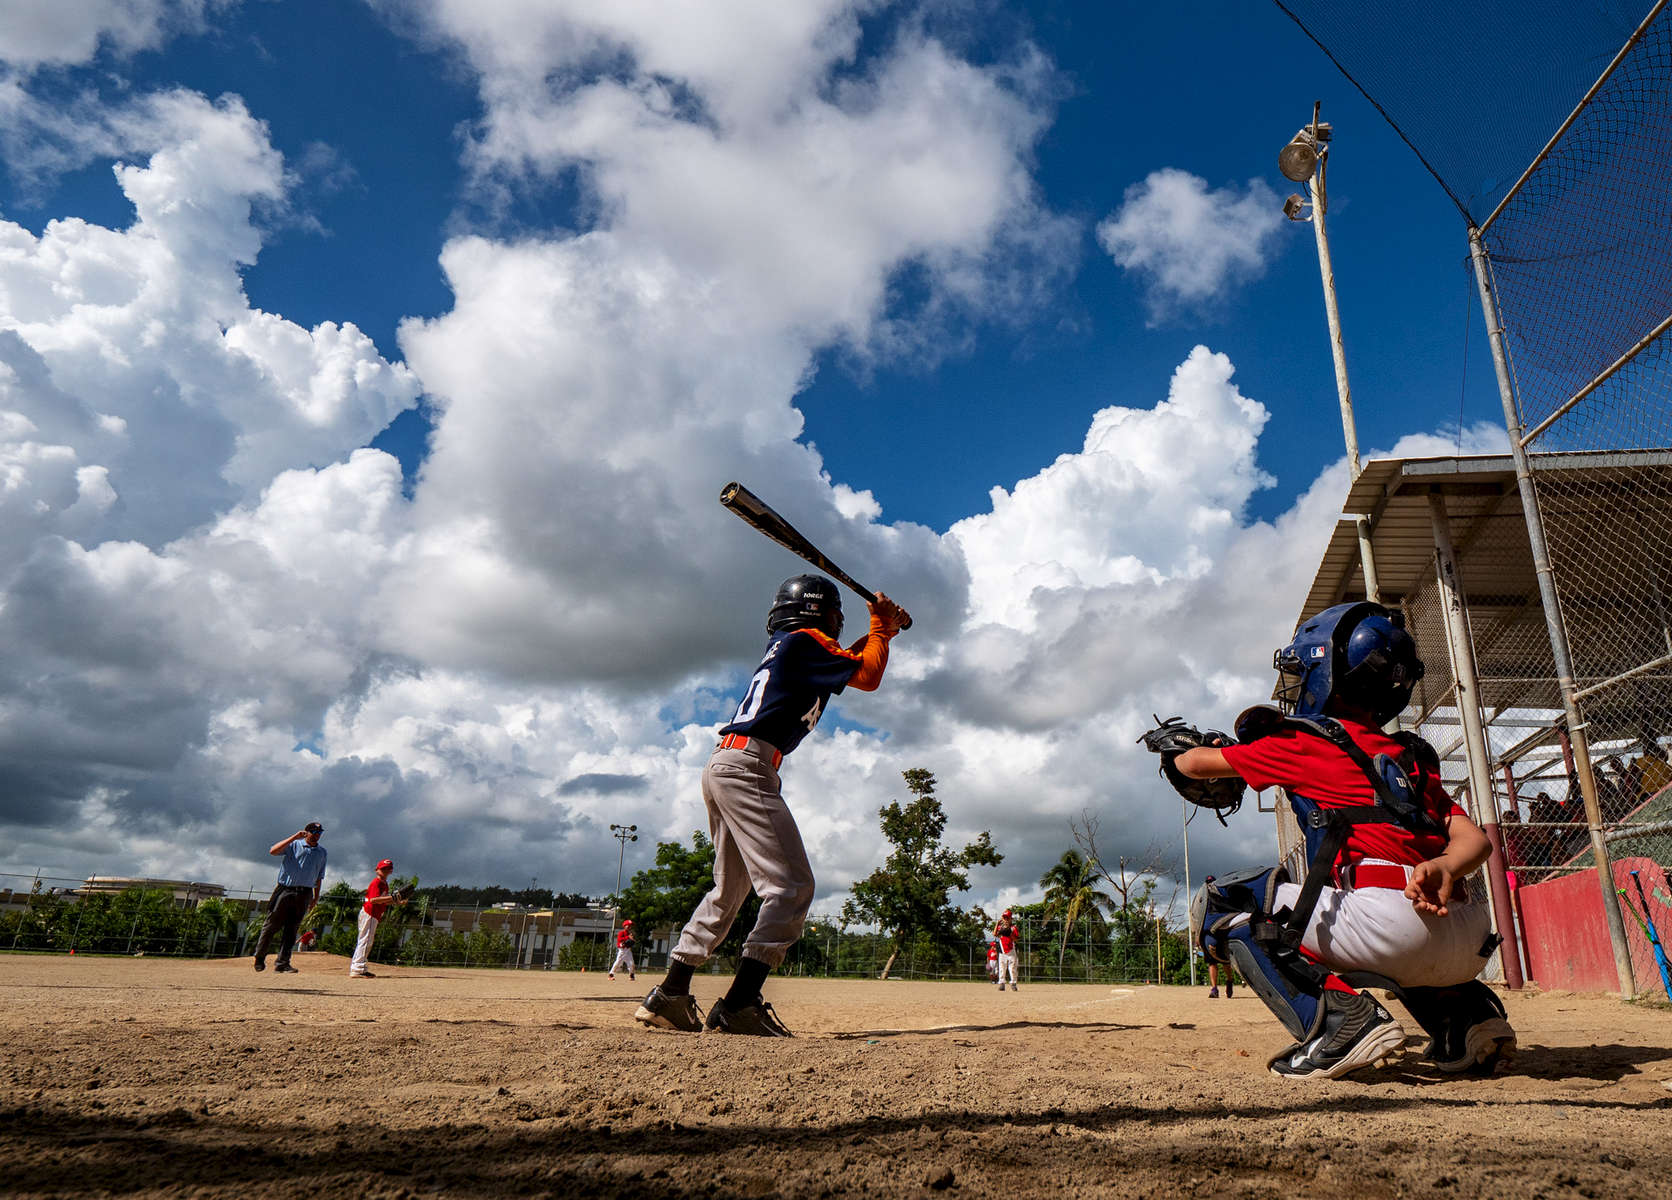 CAYEY, PUERTO RICO - NOVEMBER 10: Players compete in a Little League baseball game on November 10, 2018 in Cayey, Puerto Rico. The effort continues in Puerto Rico to remain and rebuild more than one year after the Hurricane Maria hit and devastated the island on September 20, 2017. The official number of deaths from the disaster is 2,975. 